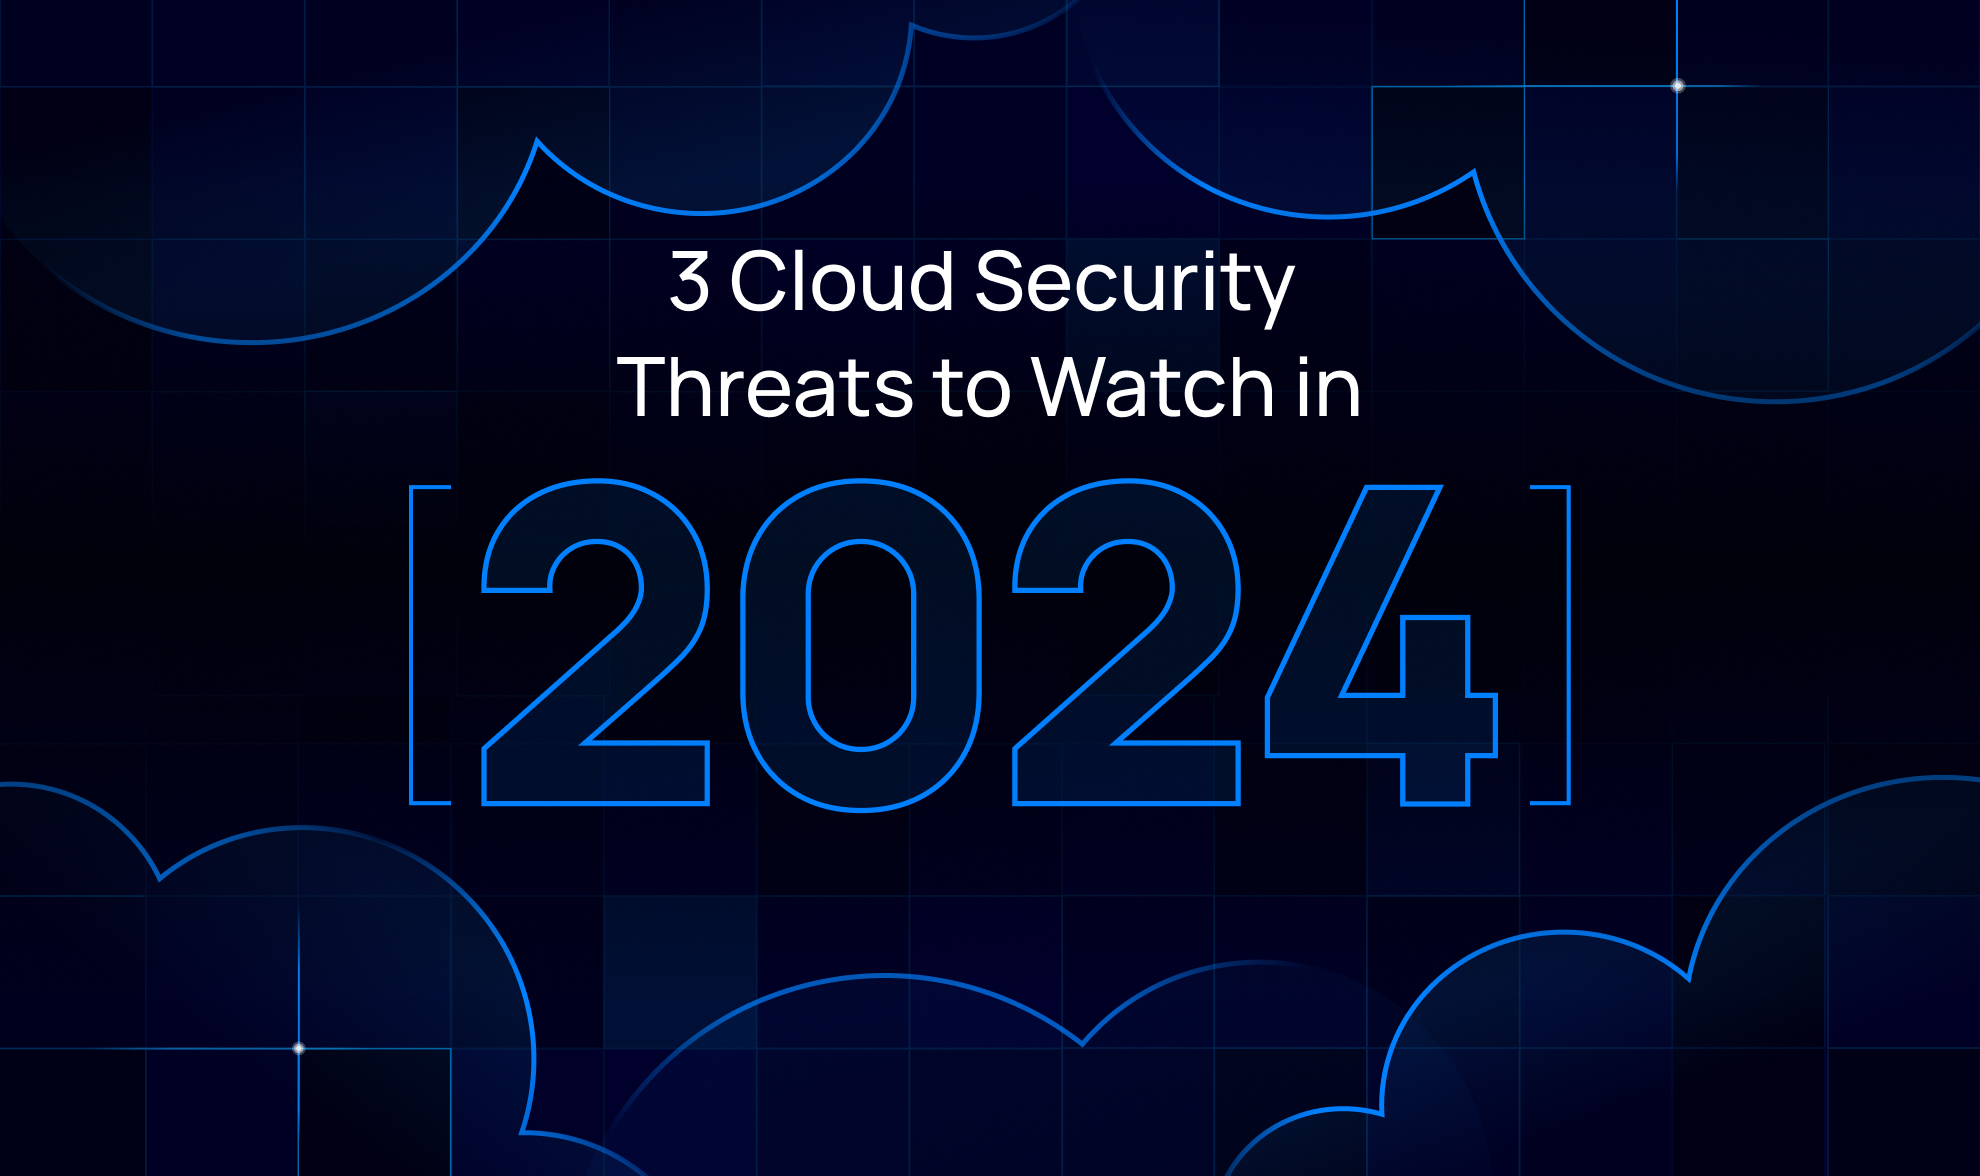 Three cloud security threats to watch in 2024